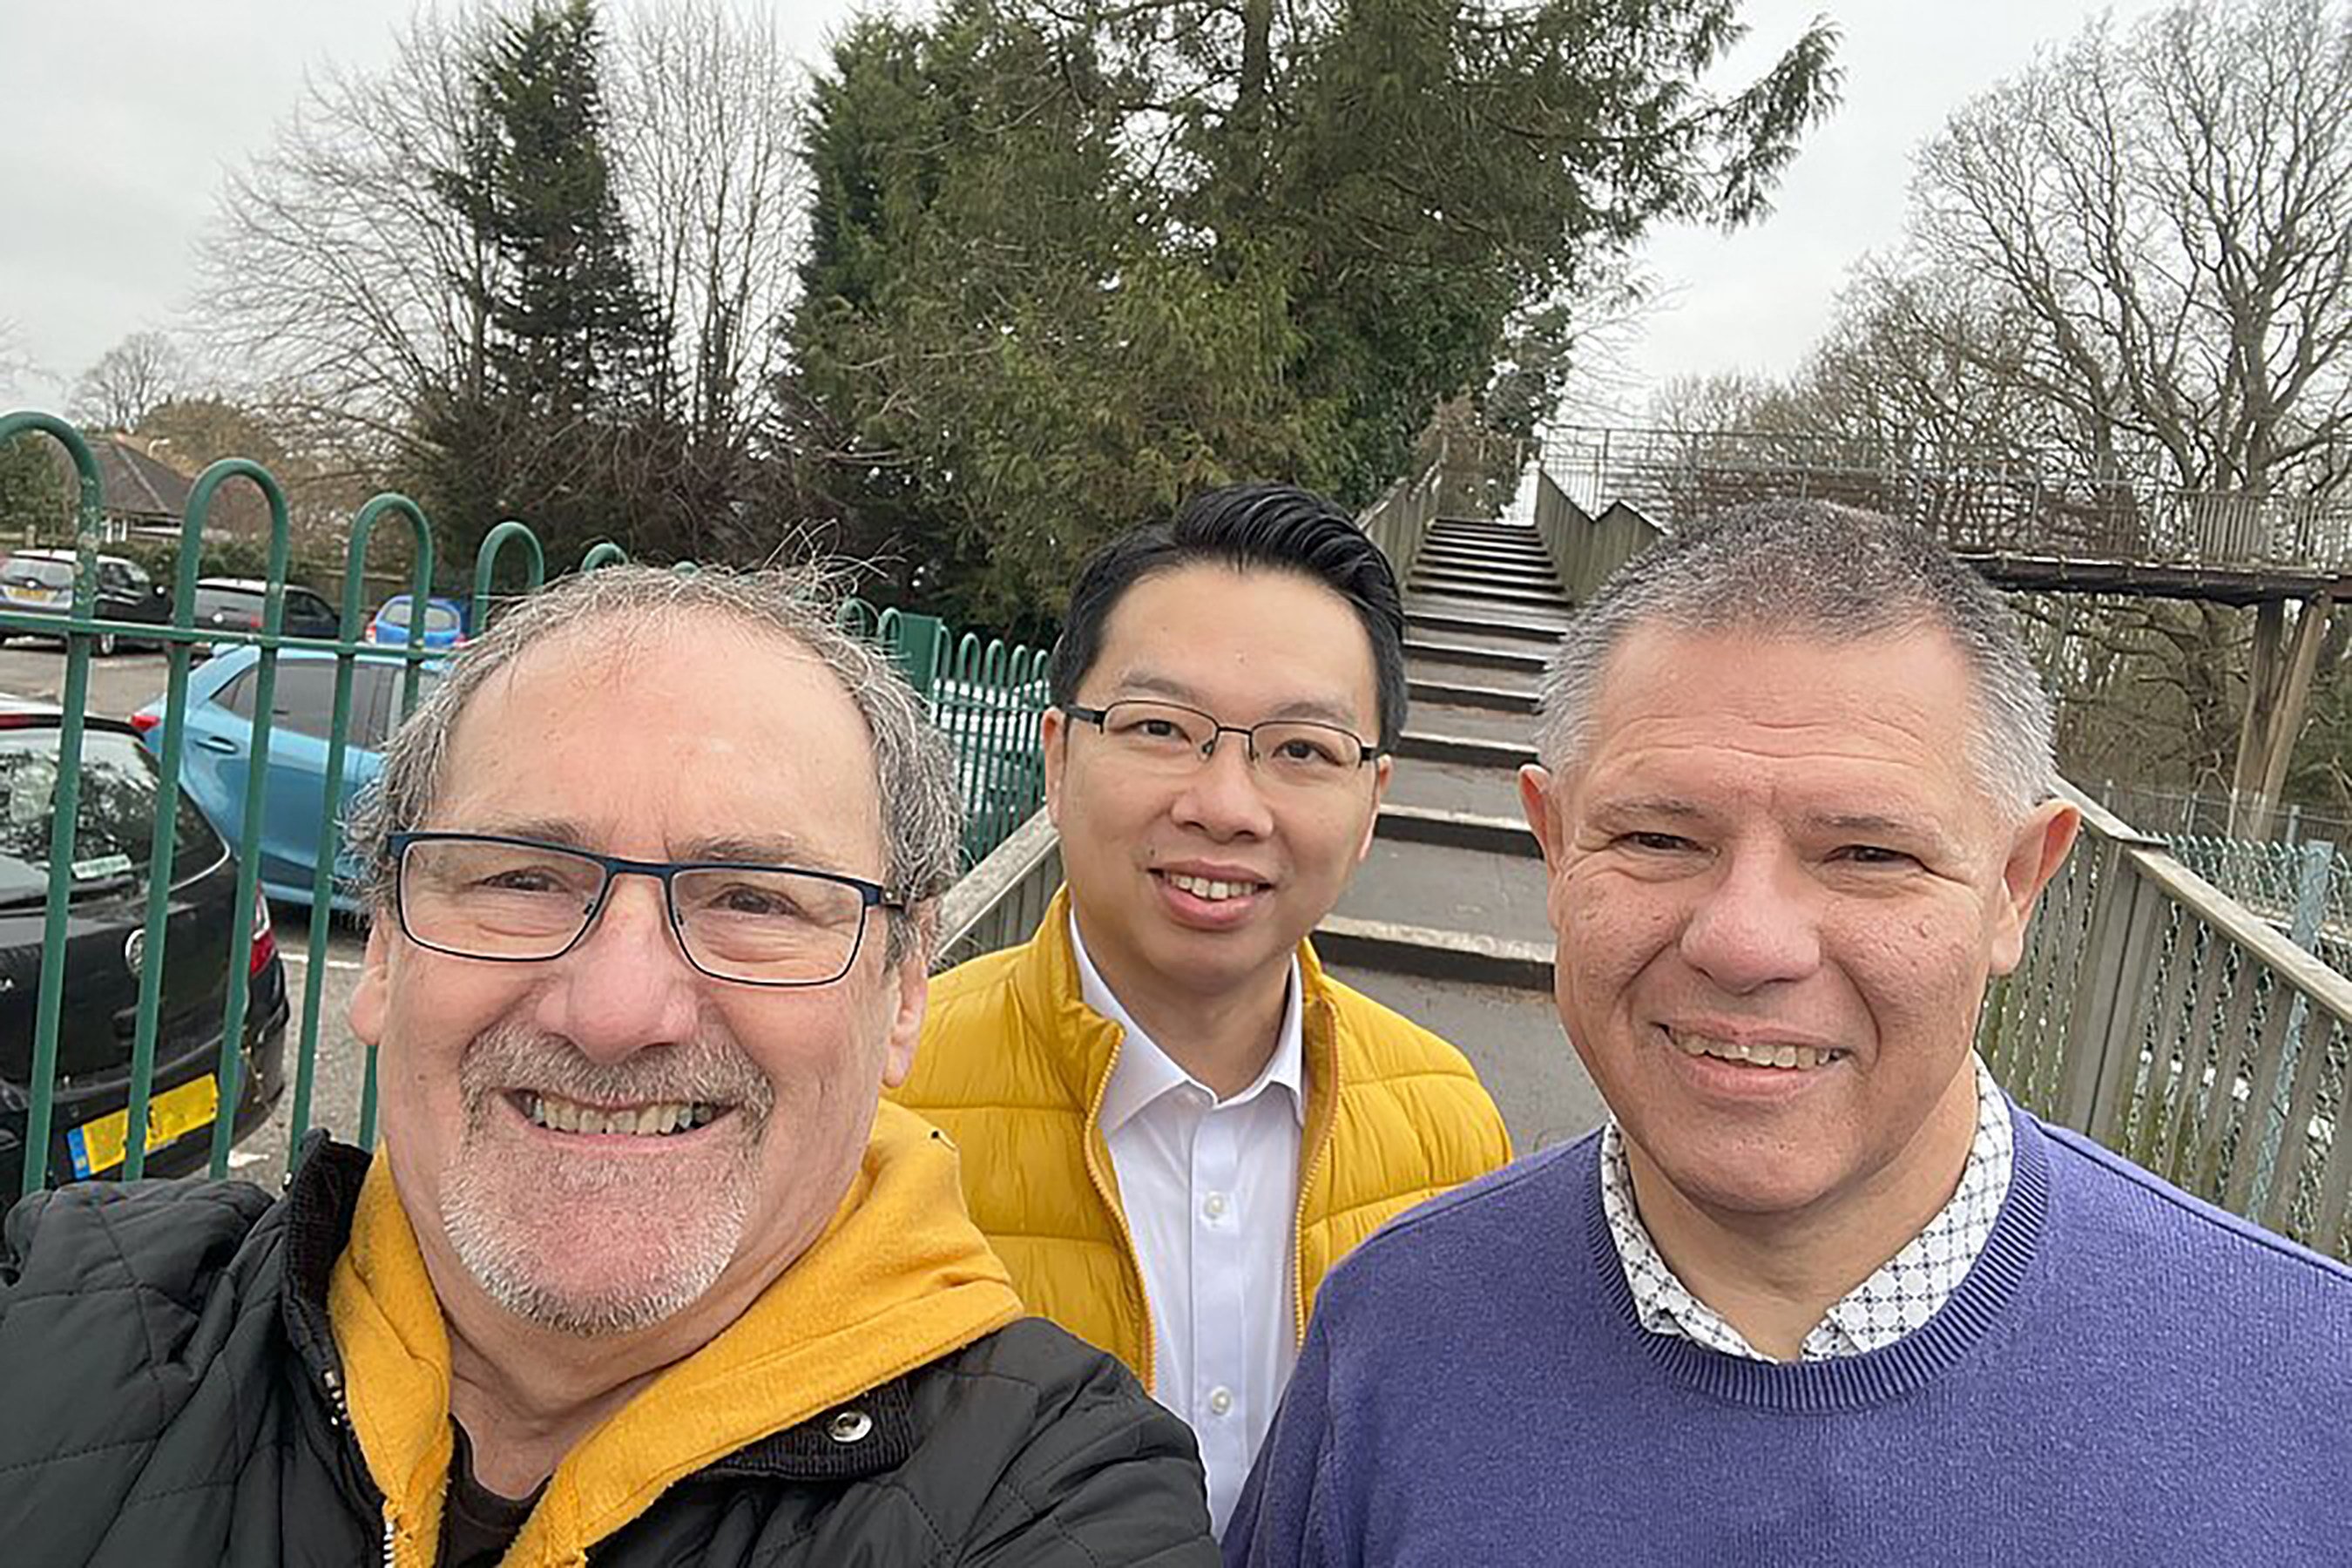 Liberal Democrat candidates for the Maiden Erlegh & Whitegates ward: Stephen Newton (right), Andy Ng (centre) and Mike Smith. Ng announced his victory on Friday in the Wokingham election. Photo: Wokingham Liberal Democrats